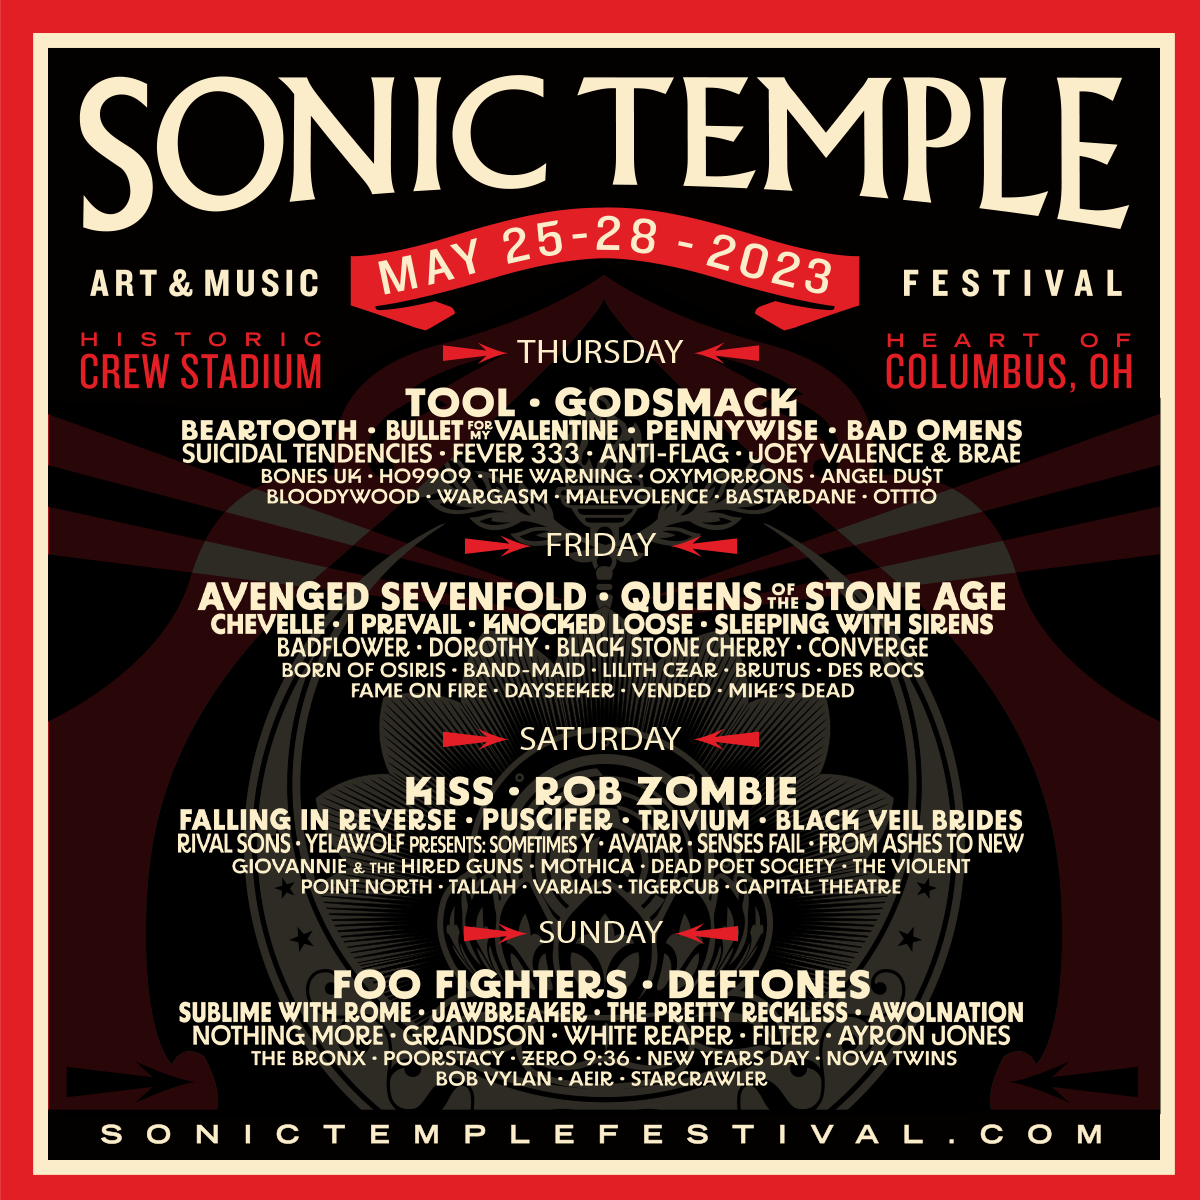 Sonic Temple Art & Music Festival: Foo Fighters & Deftones - Sunday at Nothing More Concert